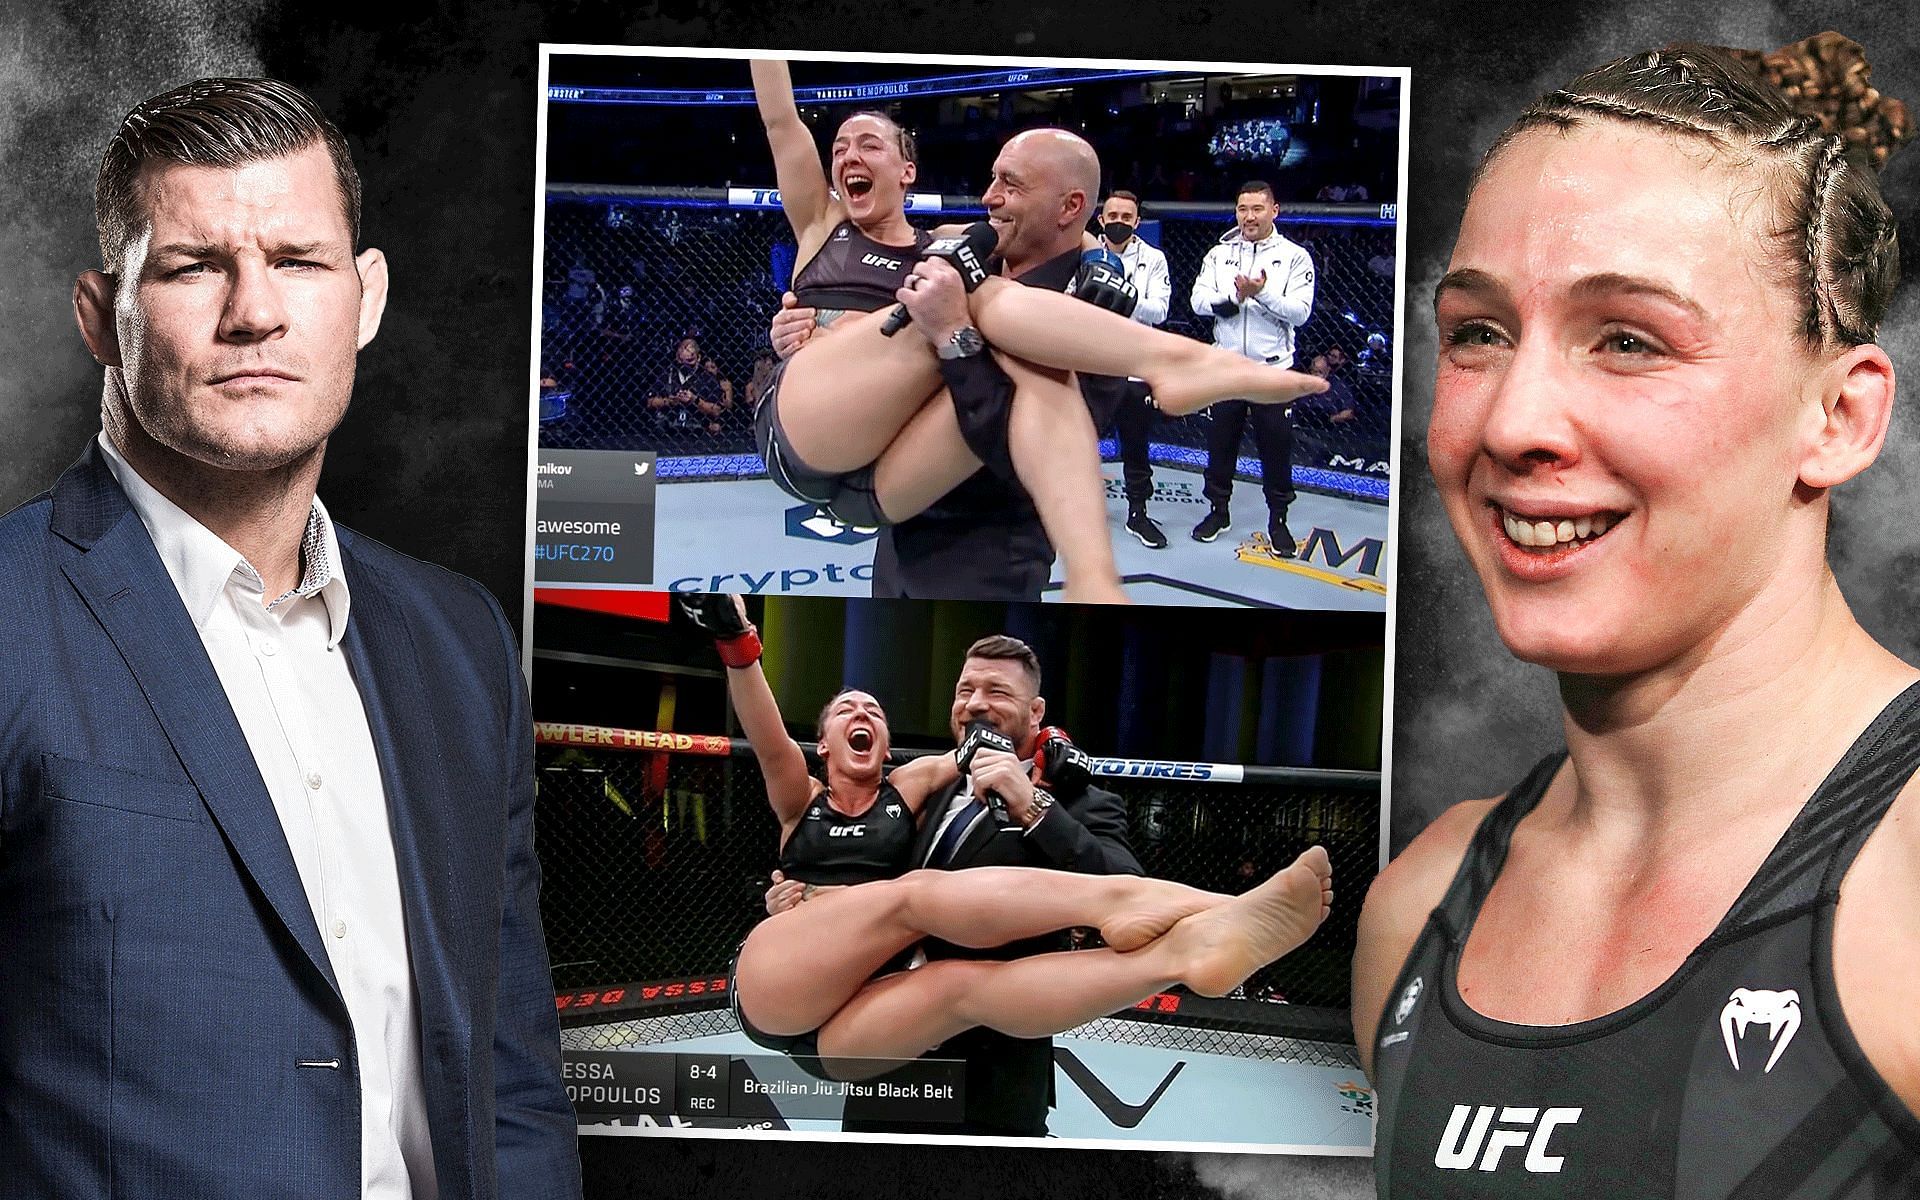 Vanessa Demopoulos comments on her post-fight celebration with Michael Bisping